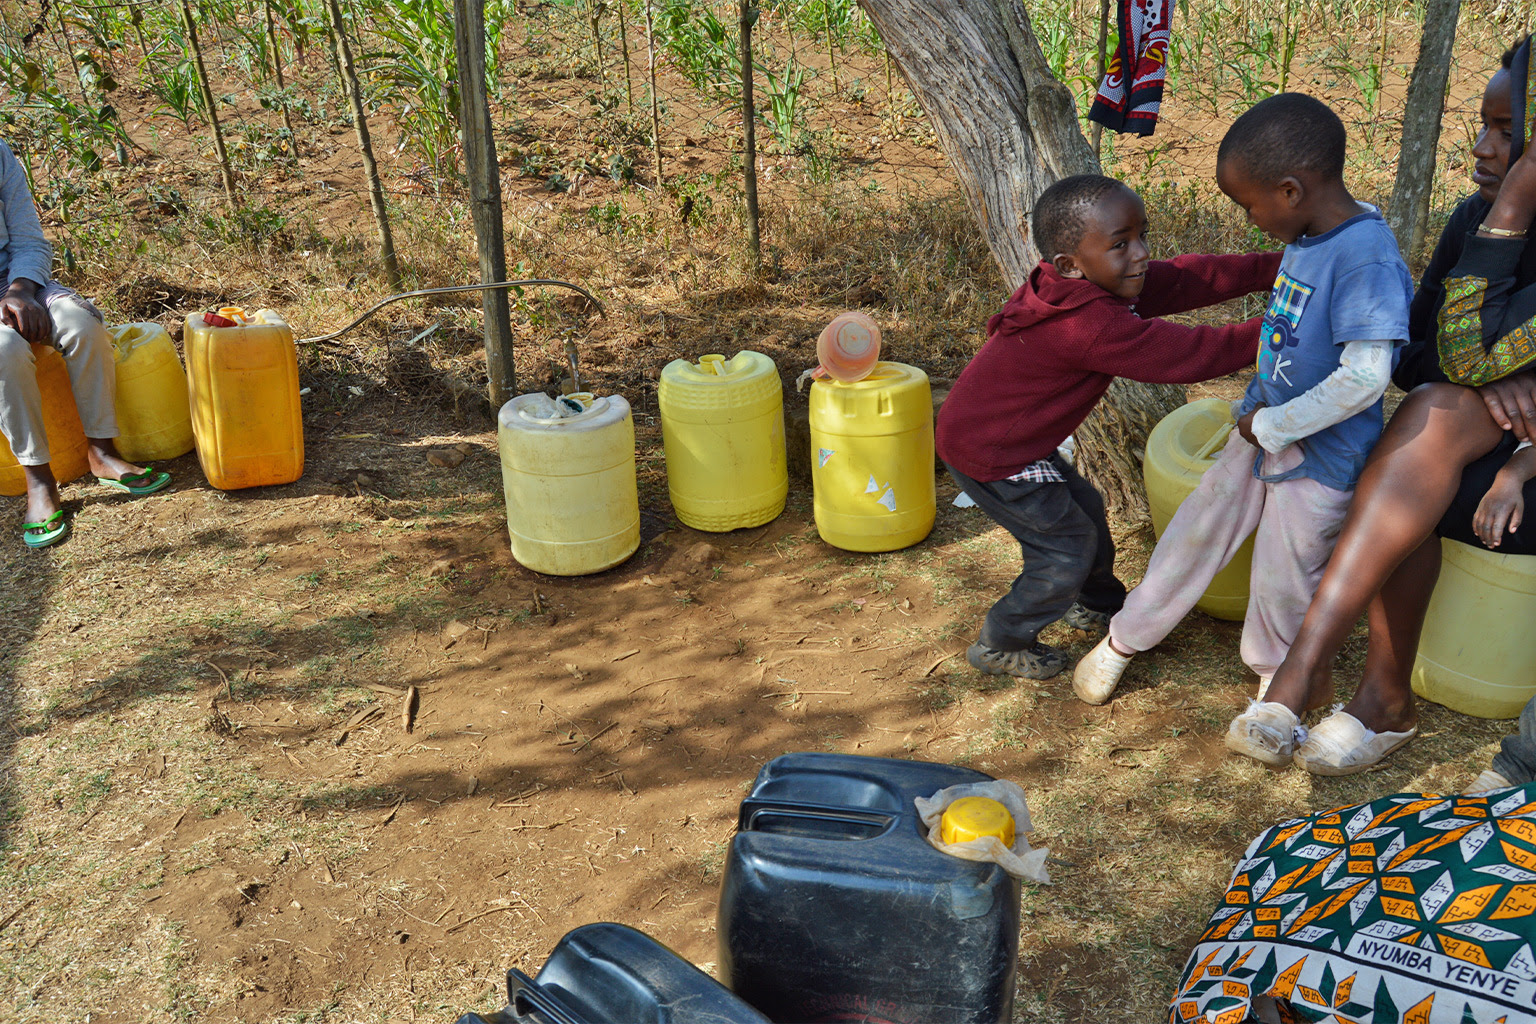 The Karanja children play as their mother waits for her turn to fetch water.